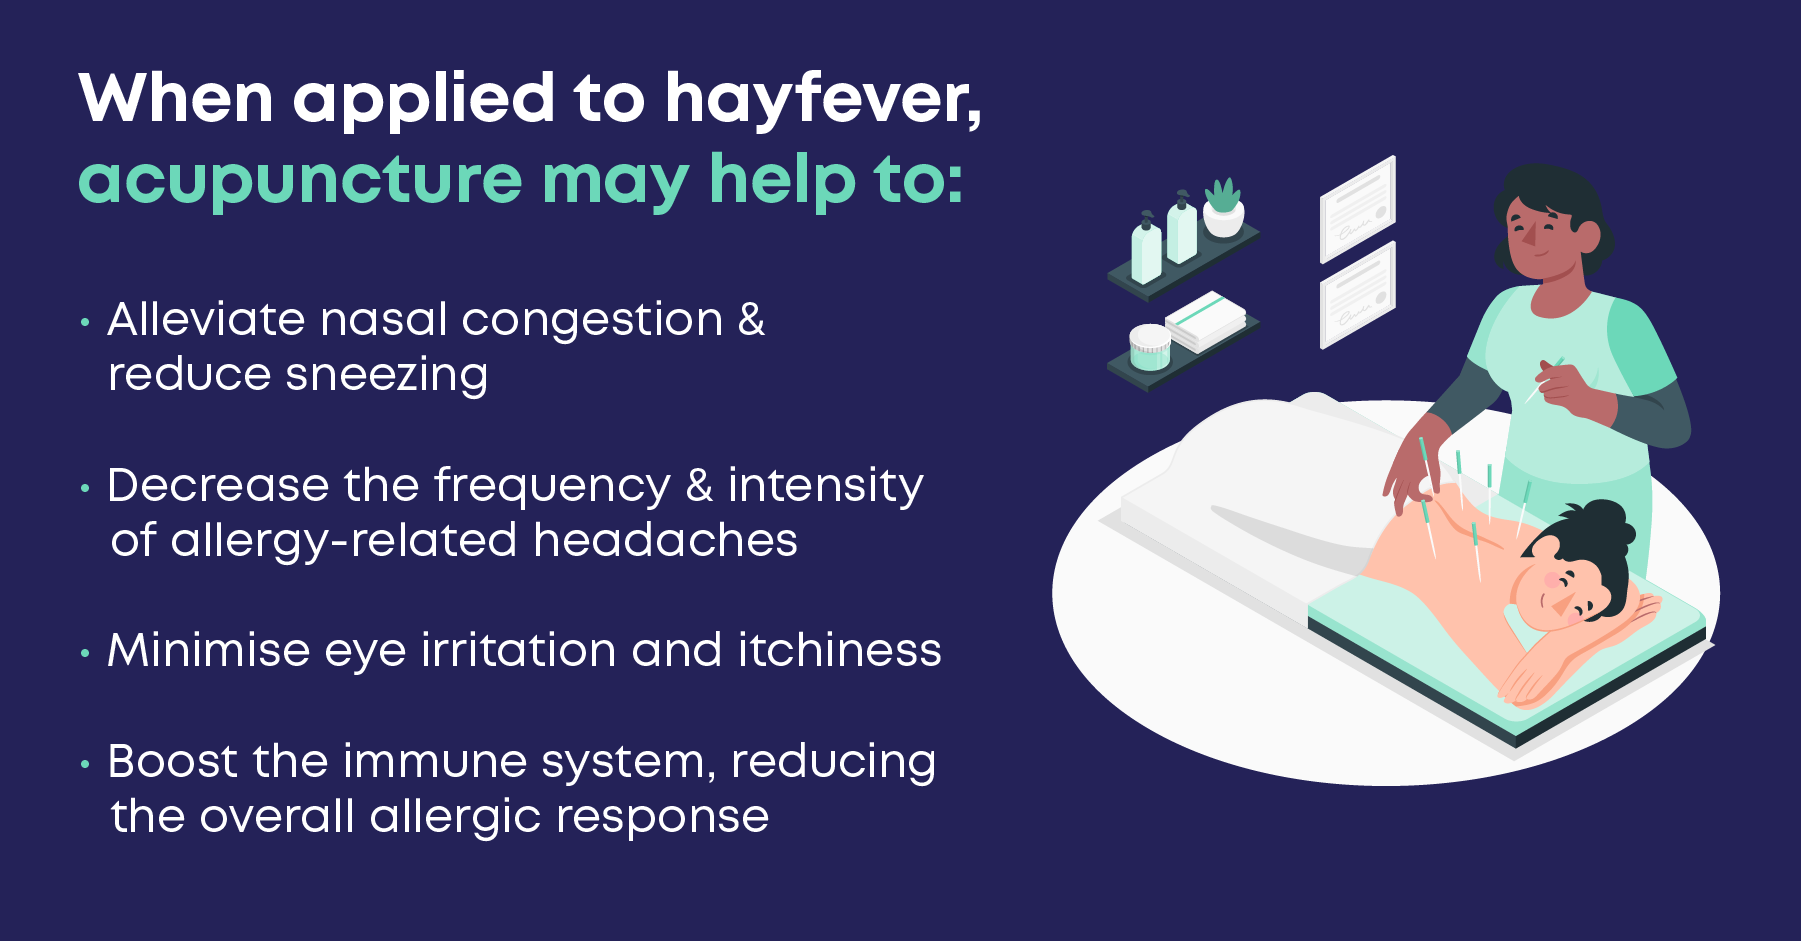 When applied to hayfever, acupuncture may help to:

Alleviate nasal congestion and reduce sneezing
Decrease the frequency and intensity of allergy-related headaches
Minimise eye irritation and itchiness
Boost the immune system, reducing the overall allergic response